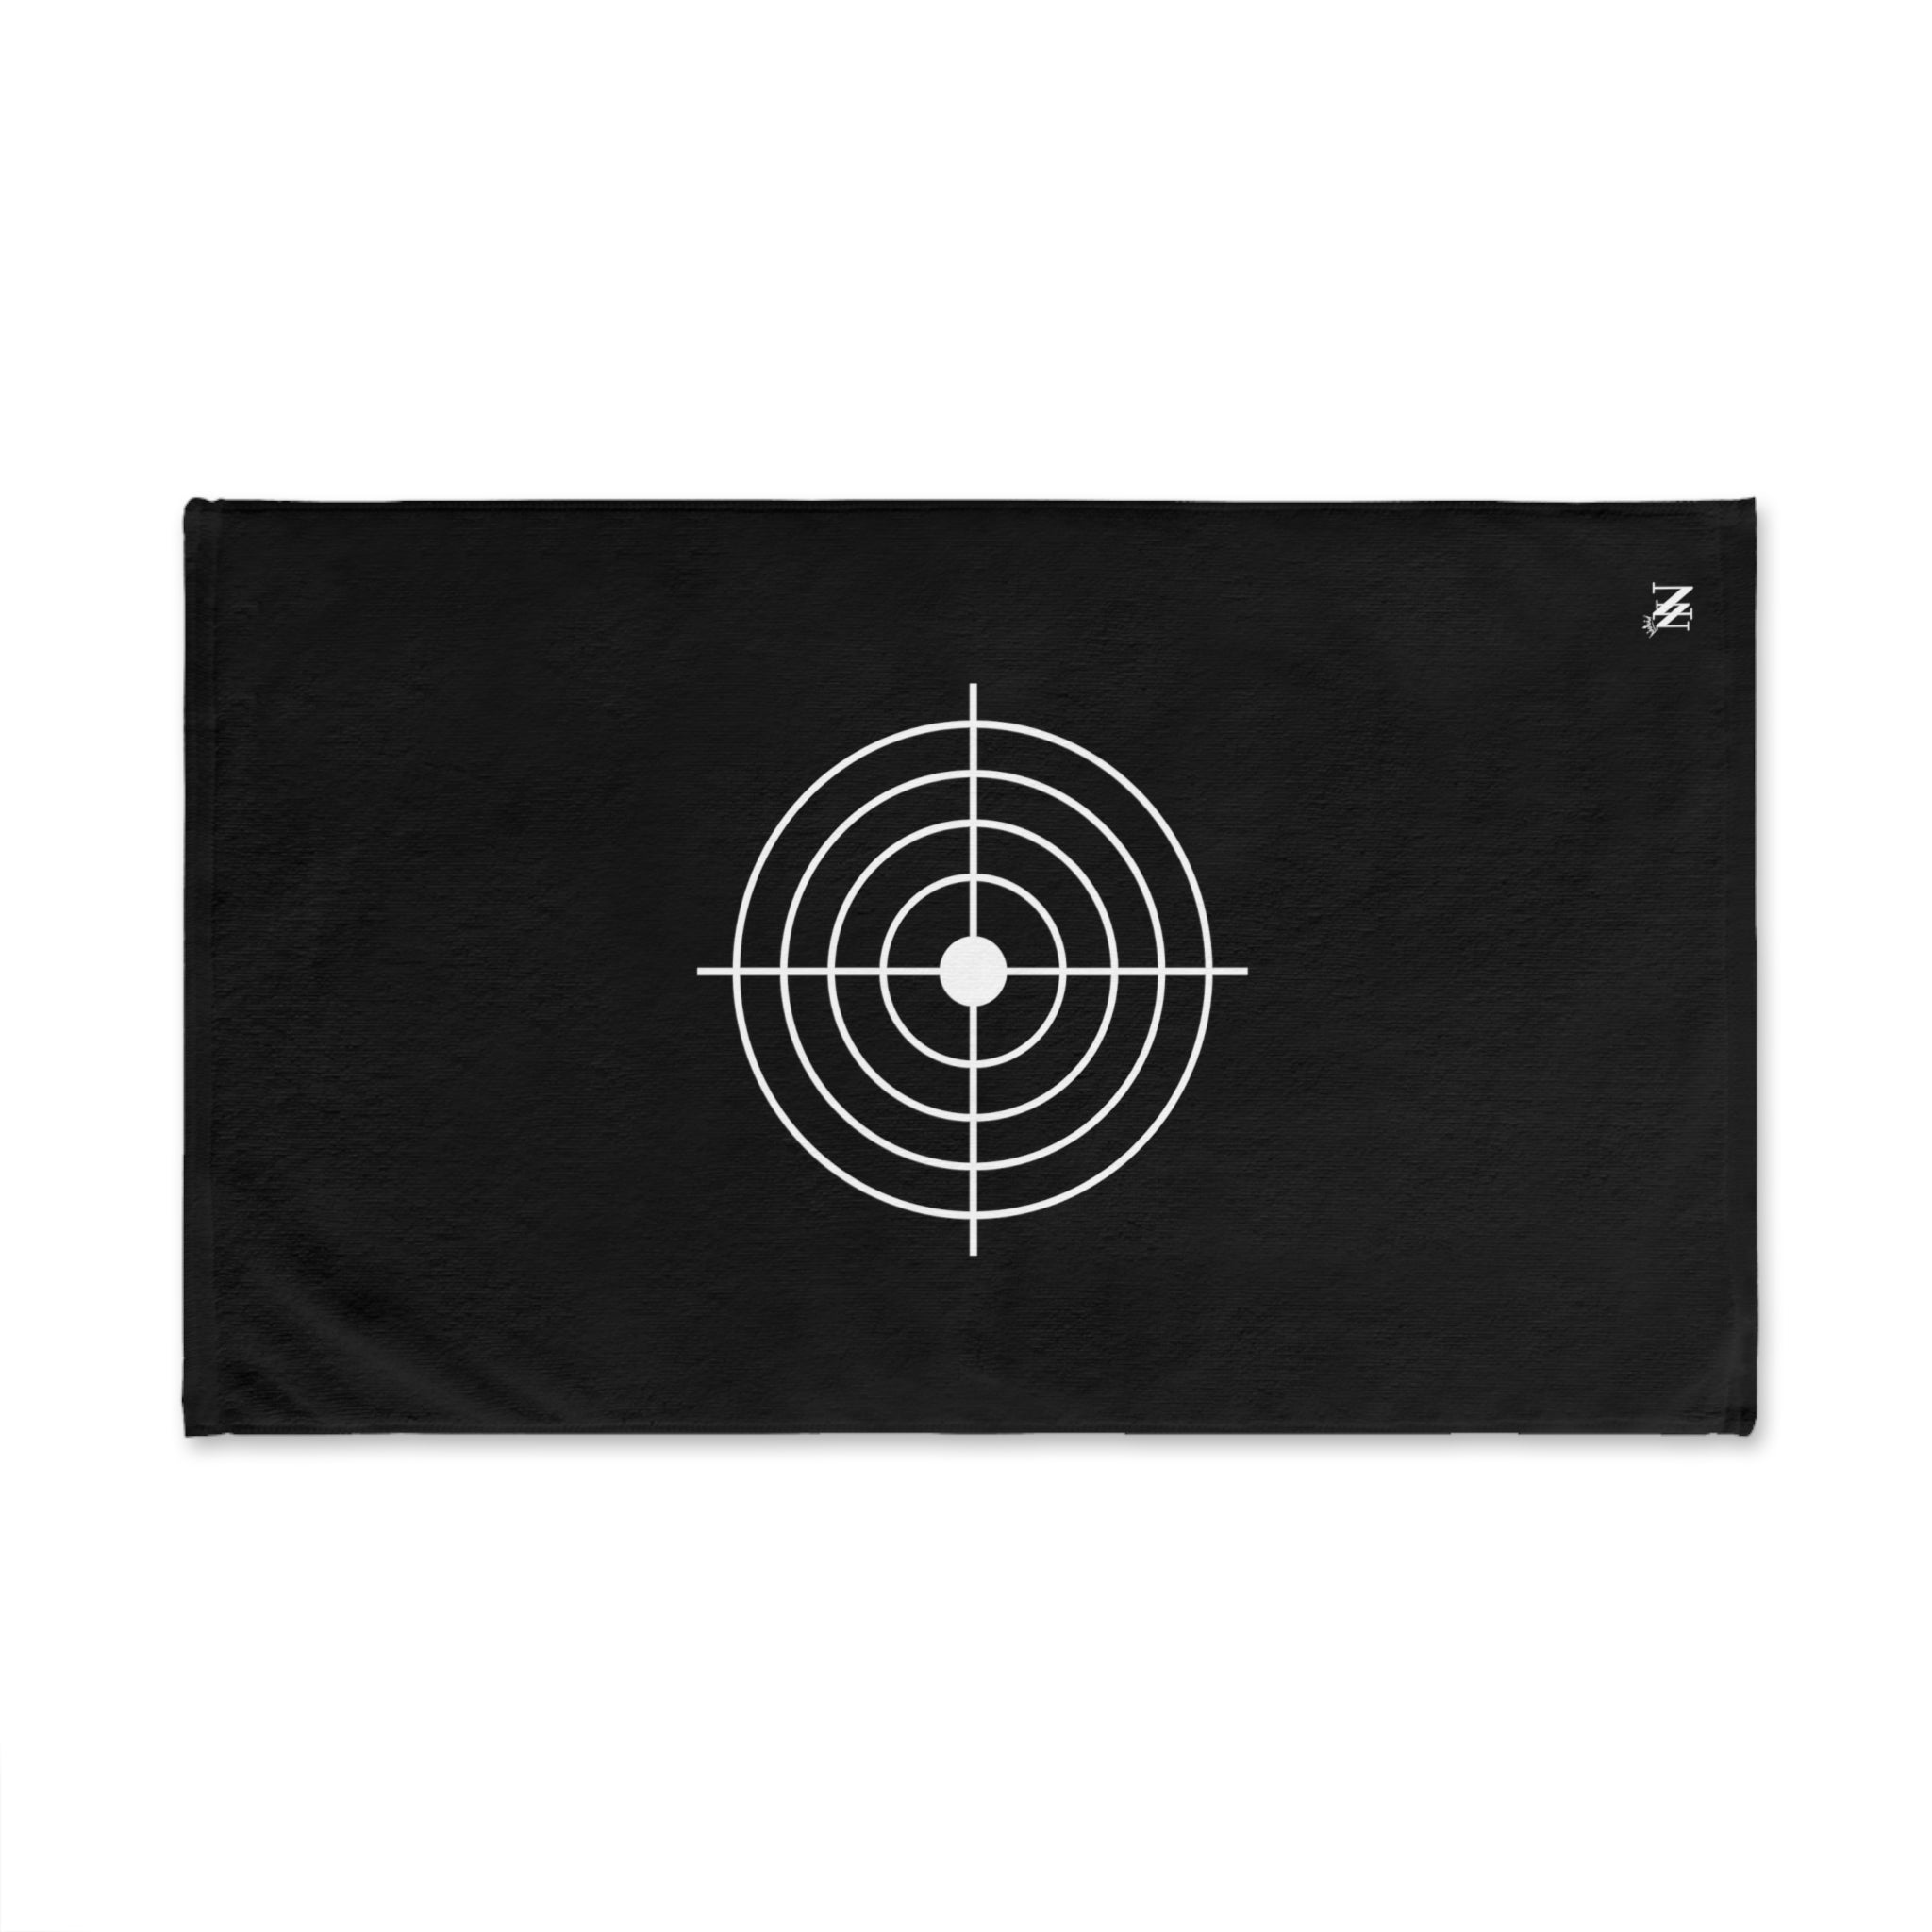 Medium White Crosshairs Black | Sexy Gifts for Boyfriend, Funny Towel Romantic Gift for Wedding Couple Fiance First Year 2nd Anniversary Valentines, Party Gag Gifts, Joke Humor Cloth for Husband Men BF NECTAR NAPKINS